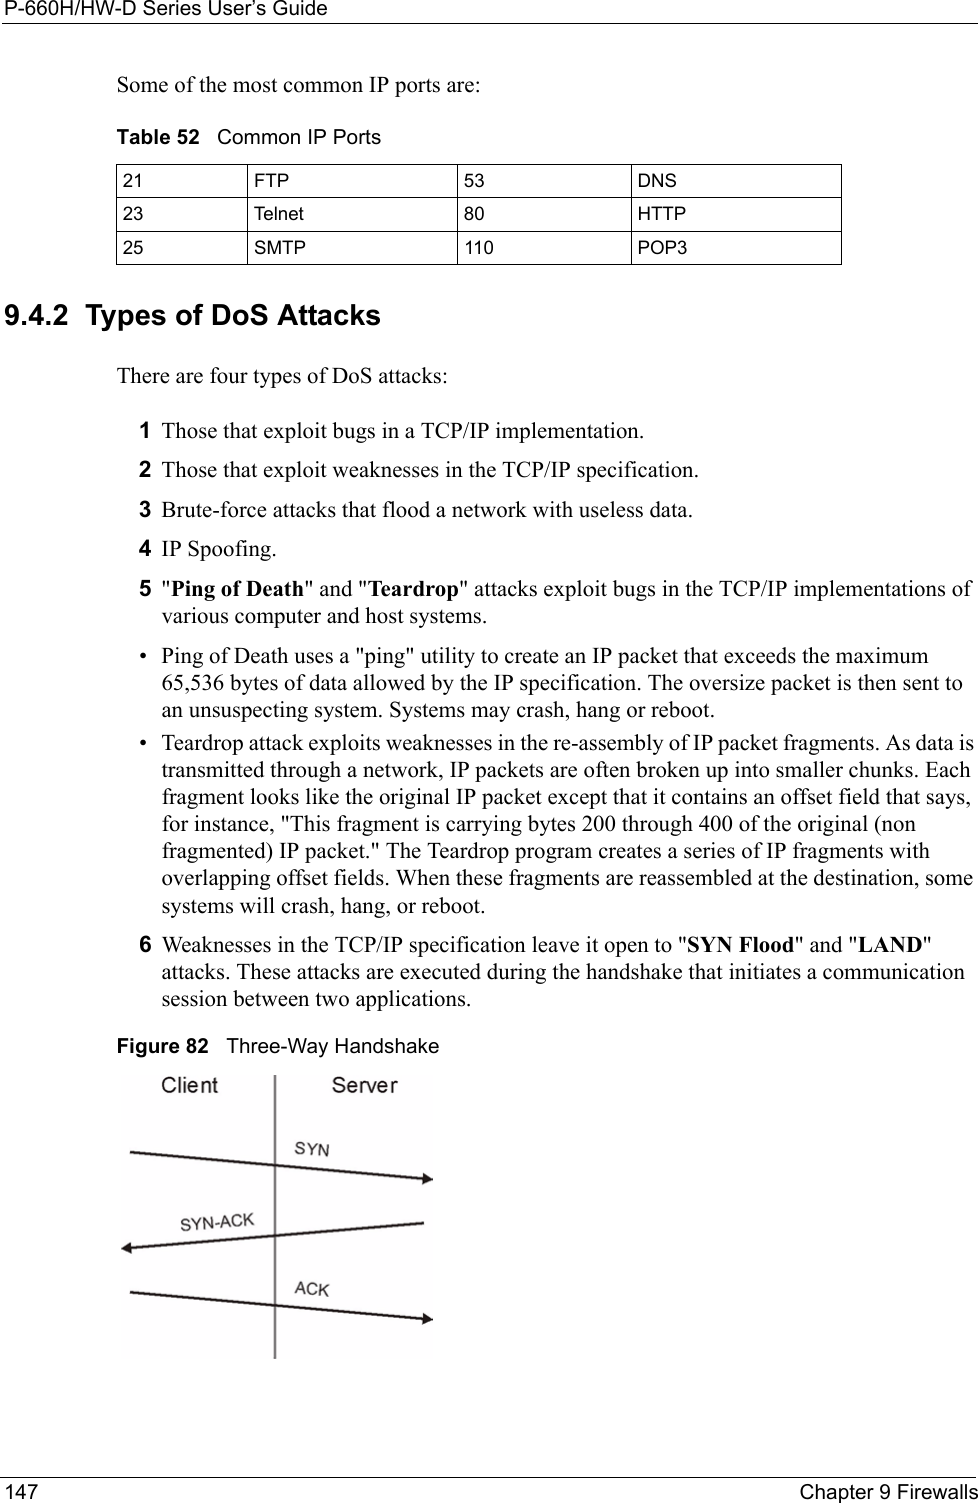 P-660H/HW-D Series User’s Guide147 Chapter 9 FirewallsSome of the most common IP ports are: 9.4.2  Types of DoS AttacksThere are four types of DoS attacks: 1Those that exploit bugs in a TCP/IP implementation.2Those that exploit weaknesses in the TCP/IP specification.3Brute-force attacks that flood a network with useless data. 4IP Spoofing.5&quot;Ping of Death&quot; and &quot;Teardrop&quot; attacks exploit bugs in the TCP/IP implementations of various computer and host systems. • Ping of Death uses a &quot;ping&quot; utility to create an IP packet that exceeds the maximum 65,536 bytes of data allowed by the IP specification. The oversize packet is then sent to an unsuspecting system. Systems may crash, hang or reboot. • Teardrop attack exploits weaknesses in the re-assembly of IP packet fragments. As data is transmitted through a network, IP packets are often broken up into smaller chunks. Each fragment looks like the original IP packet except that it contains an offset field that says, for instance, &quot;This fragment is carrying bytes 200 through 400 of the original (non fragmented) IP packet.&quot; The Teardrop program creates a series of IP fragments with overlapping offset fields. When these fragments are reassembled at the destination, some systems will crash, hang, or reboot. 6Weaknesses in the TCP/IP specification leave it open to &quot;SYN Flood&quot; and &quot;LAND&quot; attacks. These attacks are executed during the handshake that initiates a communication session between two applications.Figure 82   Three-Way HandshakeTable 52   Common IP Ports21 FTP 53 DNS23 Telnet 80 HTTP25 SMTP 110 POP3